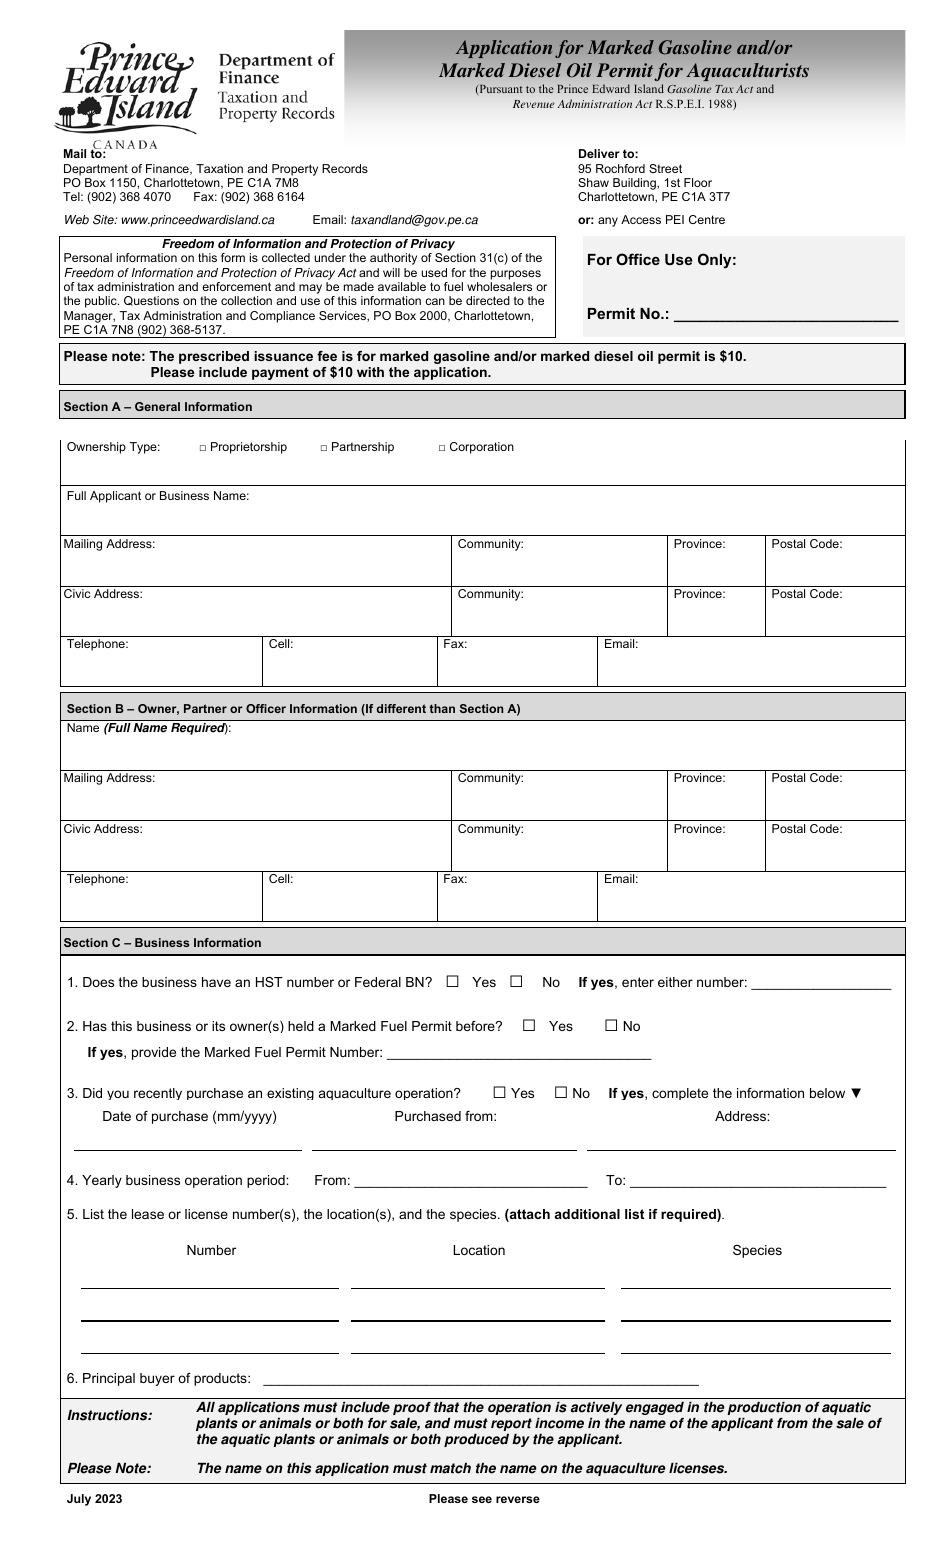 Application for Marked Gasoline and / or Marked Diesel Oil Permit for Aquaculturists - Prince Edward Island, Canada, Page 1